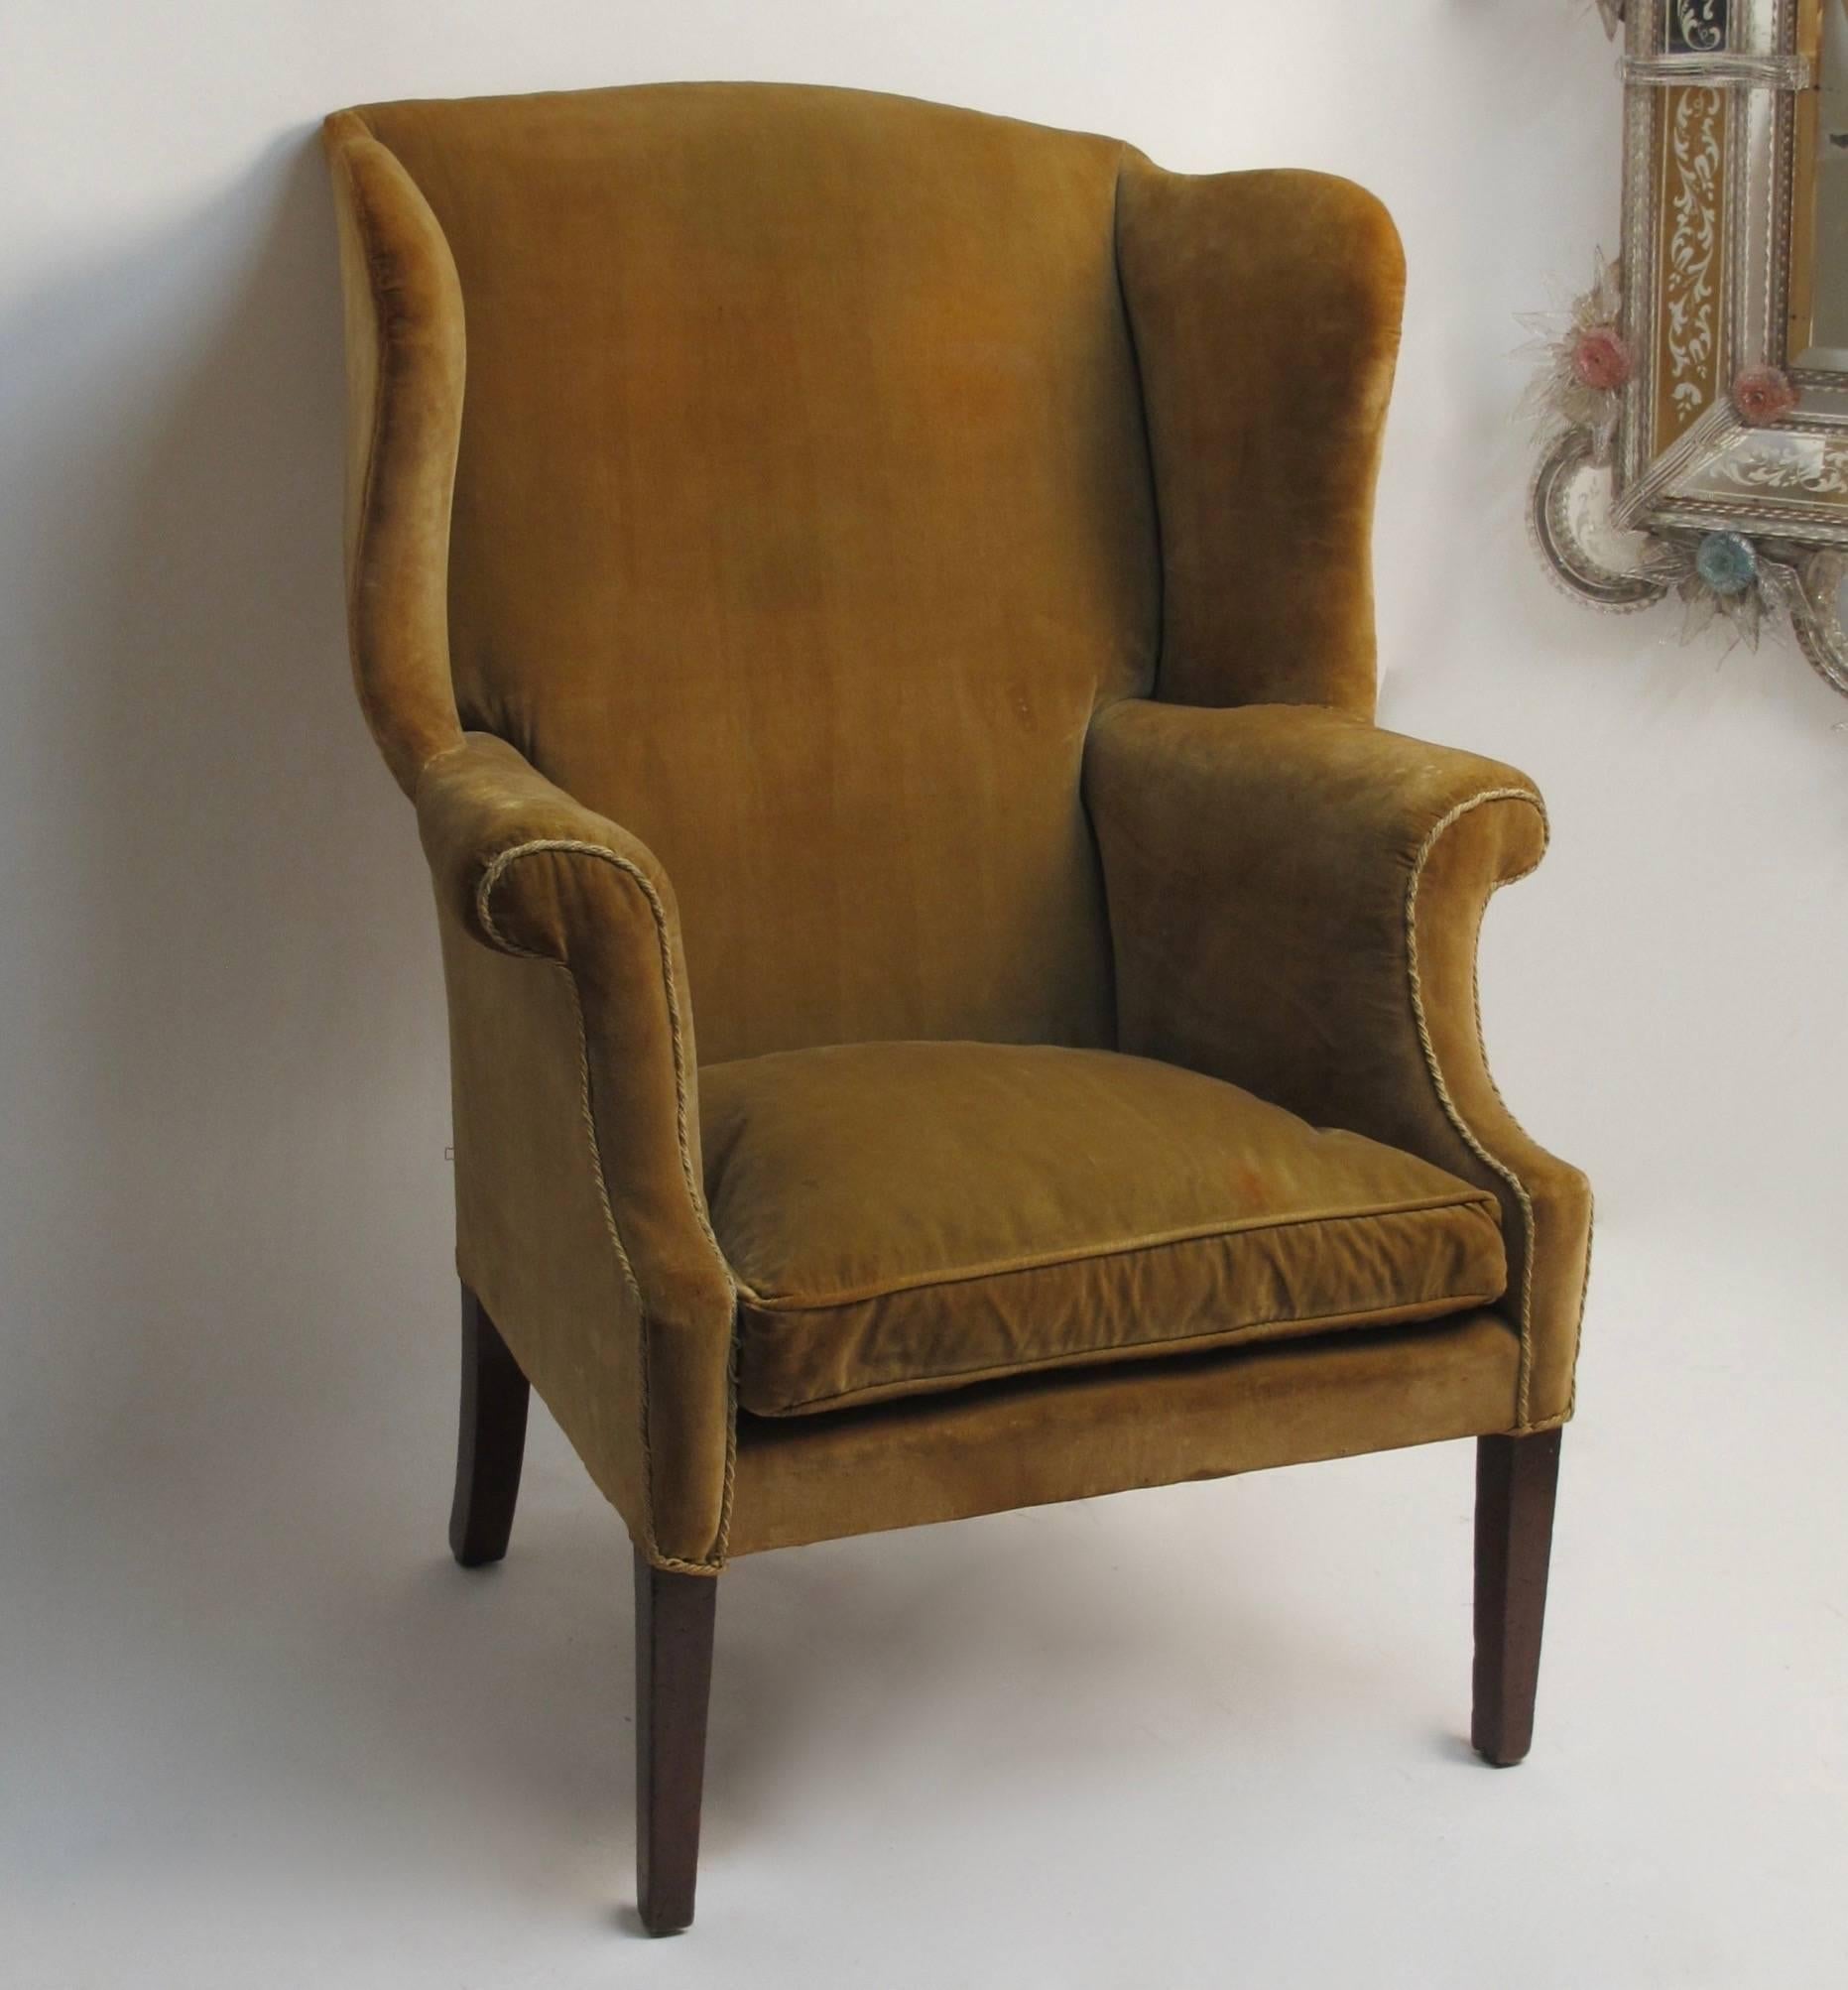 A generously proportioned wingback chair with tapering mahogany front legs and rear saber legs. Older upholstery shows signs of use and age. American, 18th century.